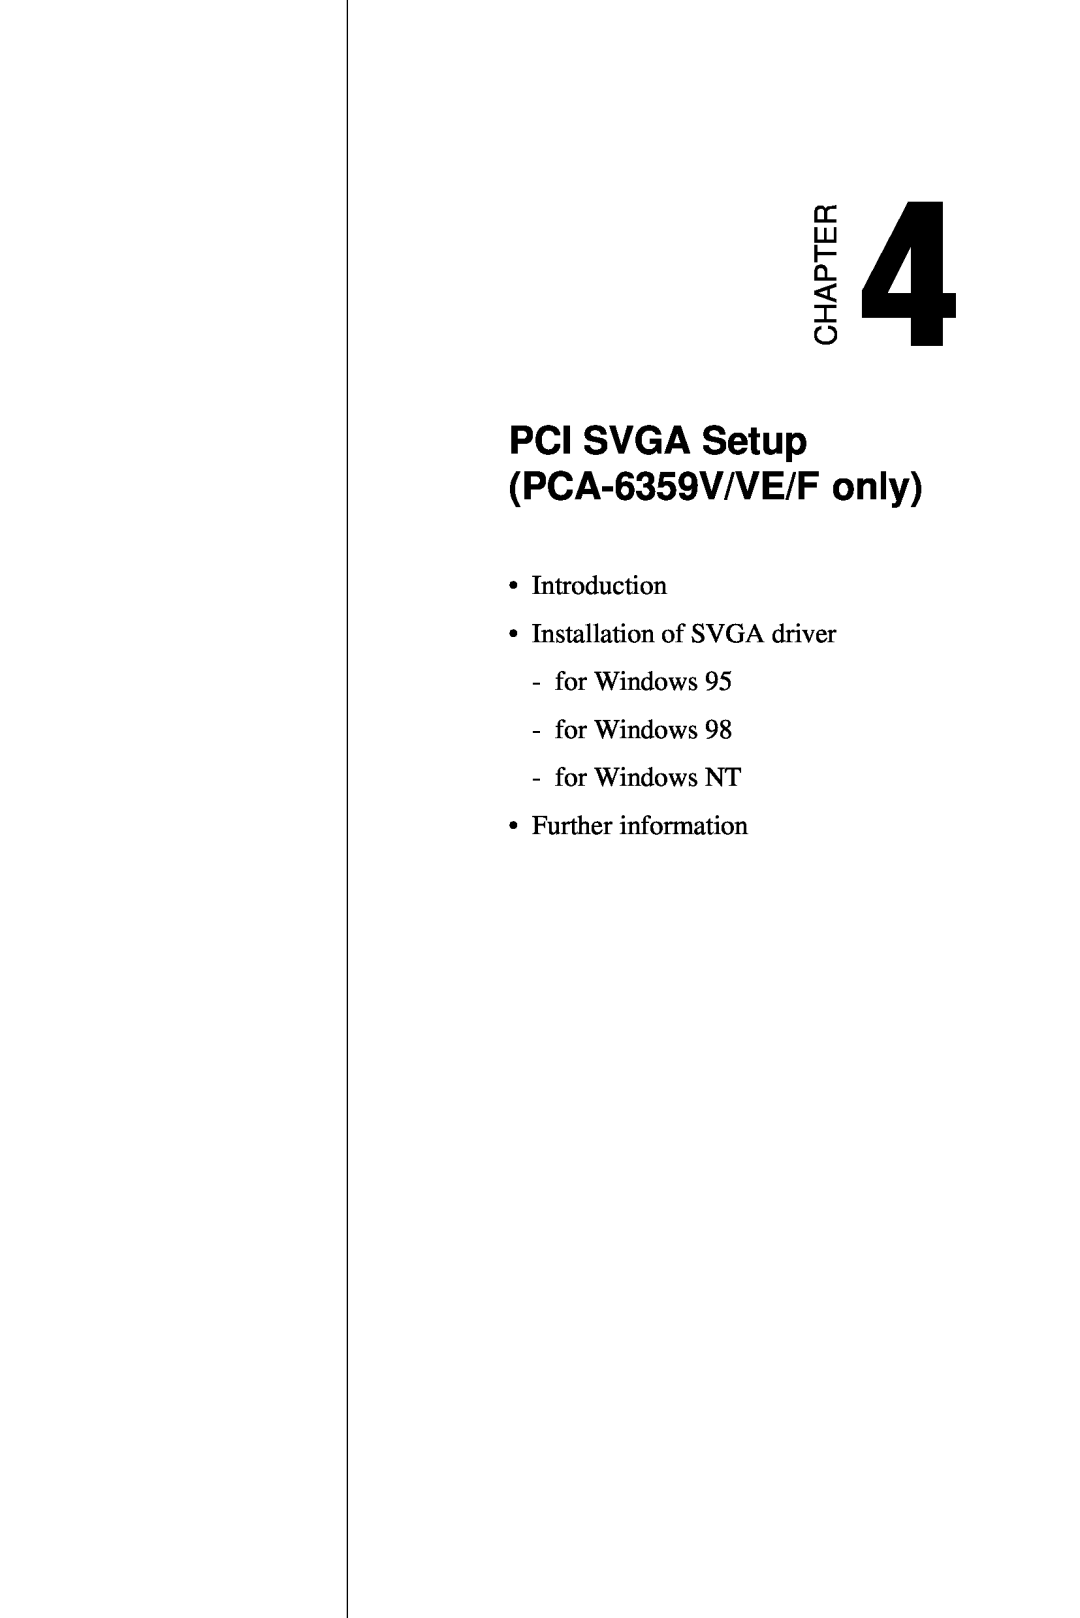 Advantech PCI SVGA Setup PCA-6359V/VE/F only, Chapter, Introduction Installation of SVGA driver for Windows for Windows 